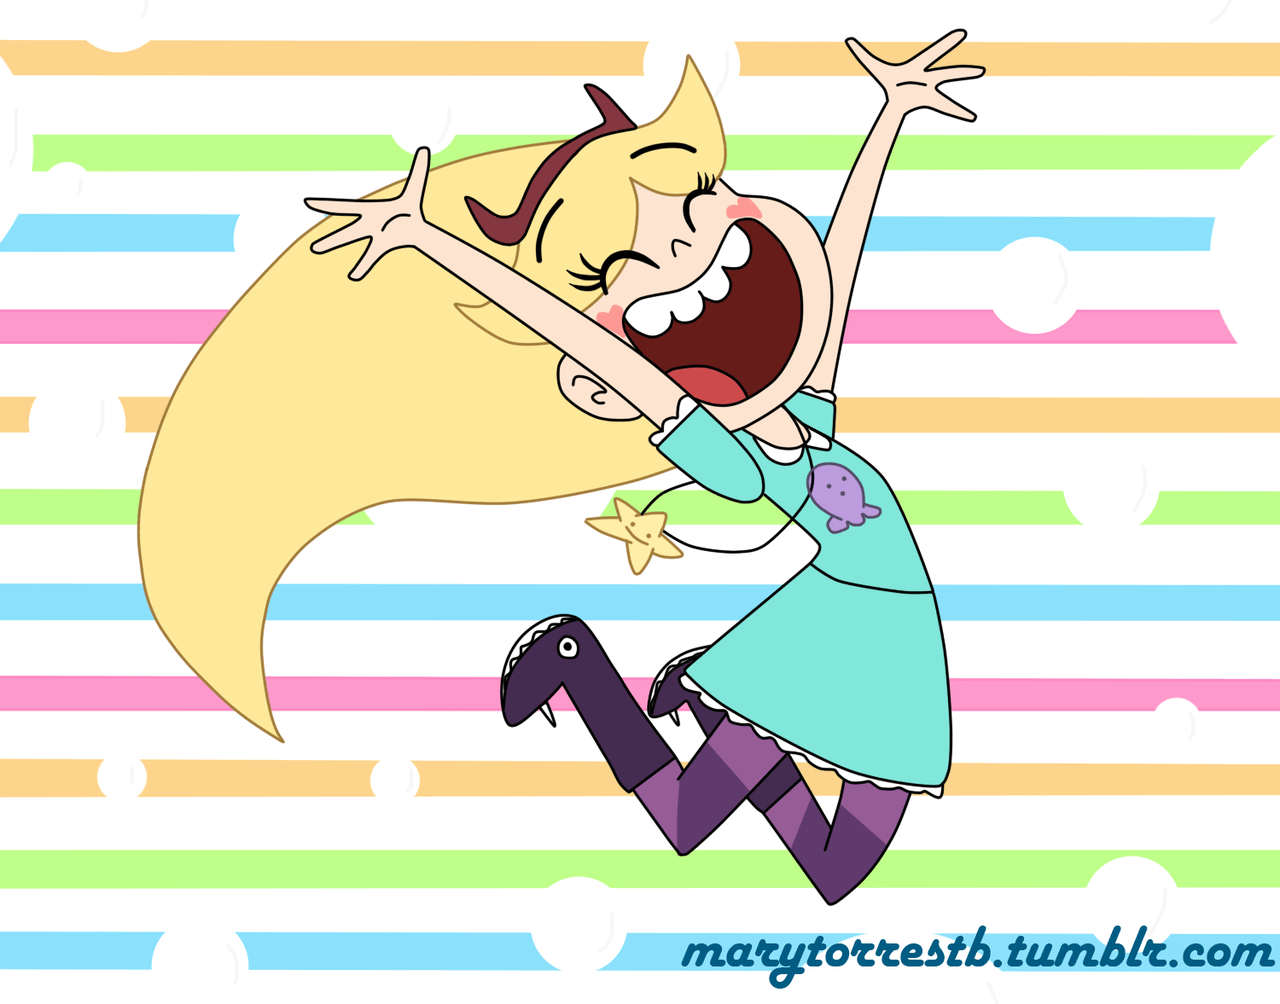 Star vs. the forces of evil